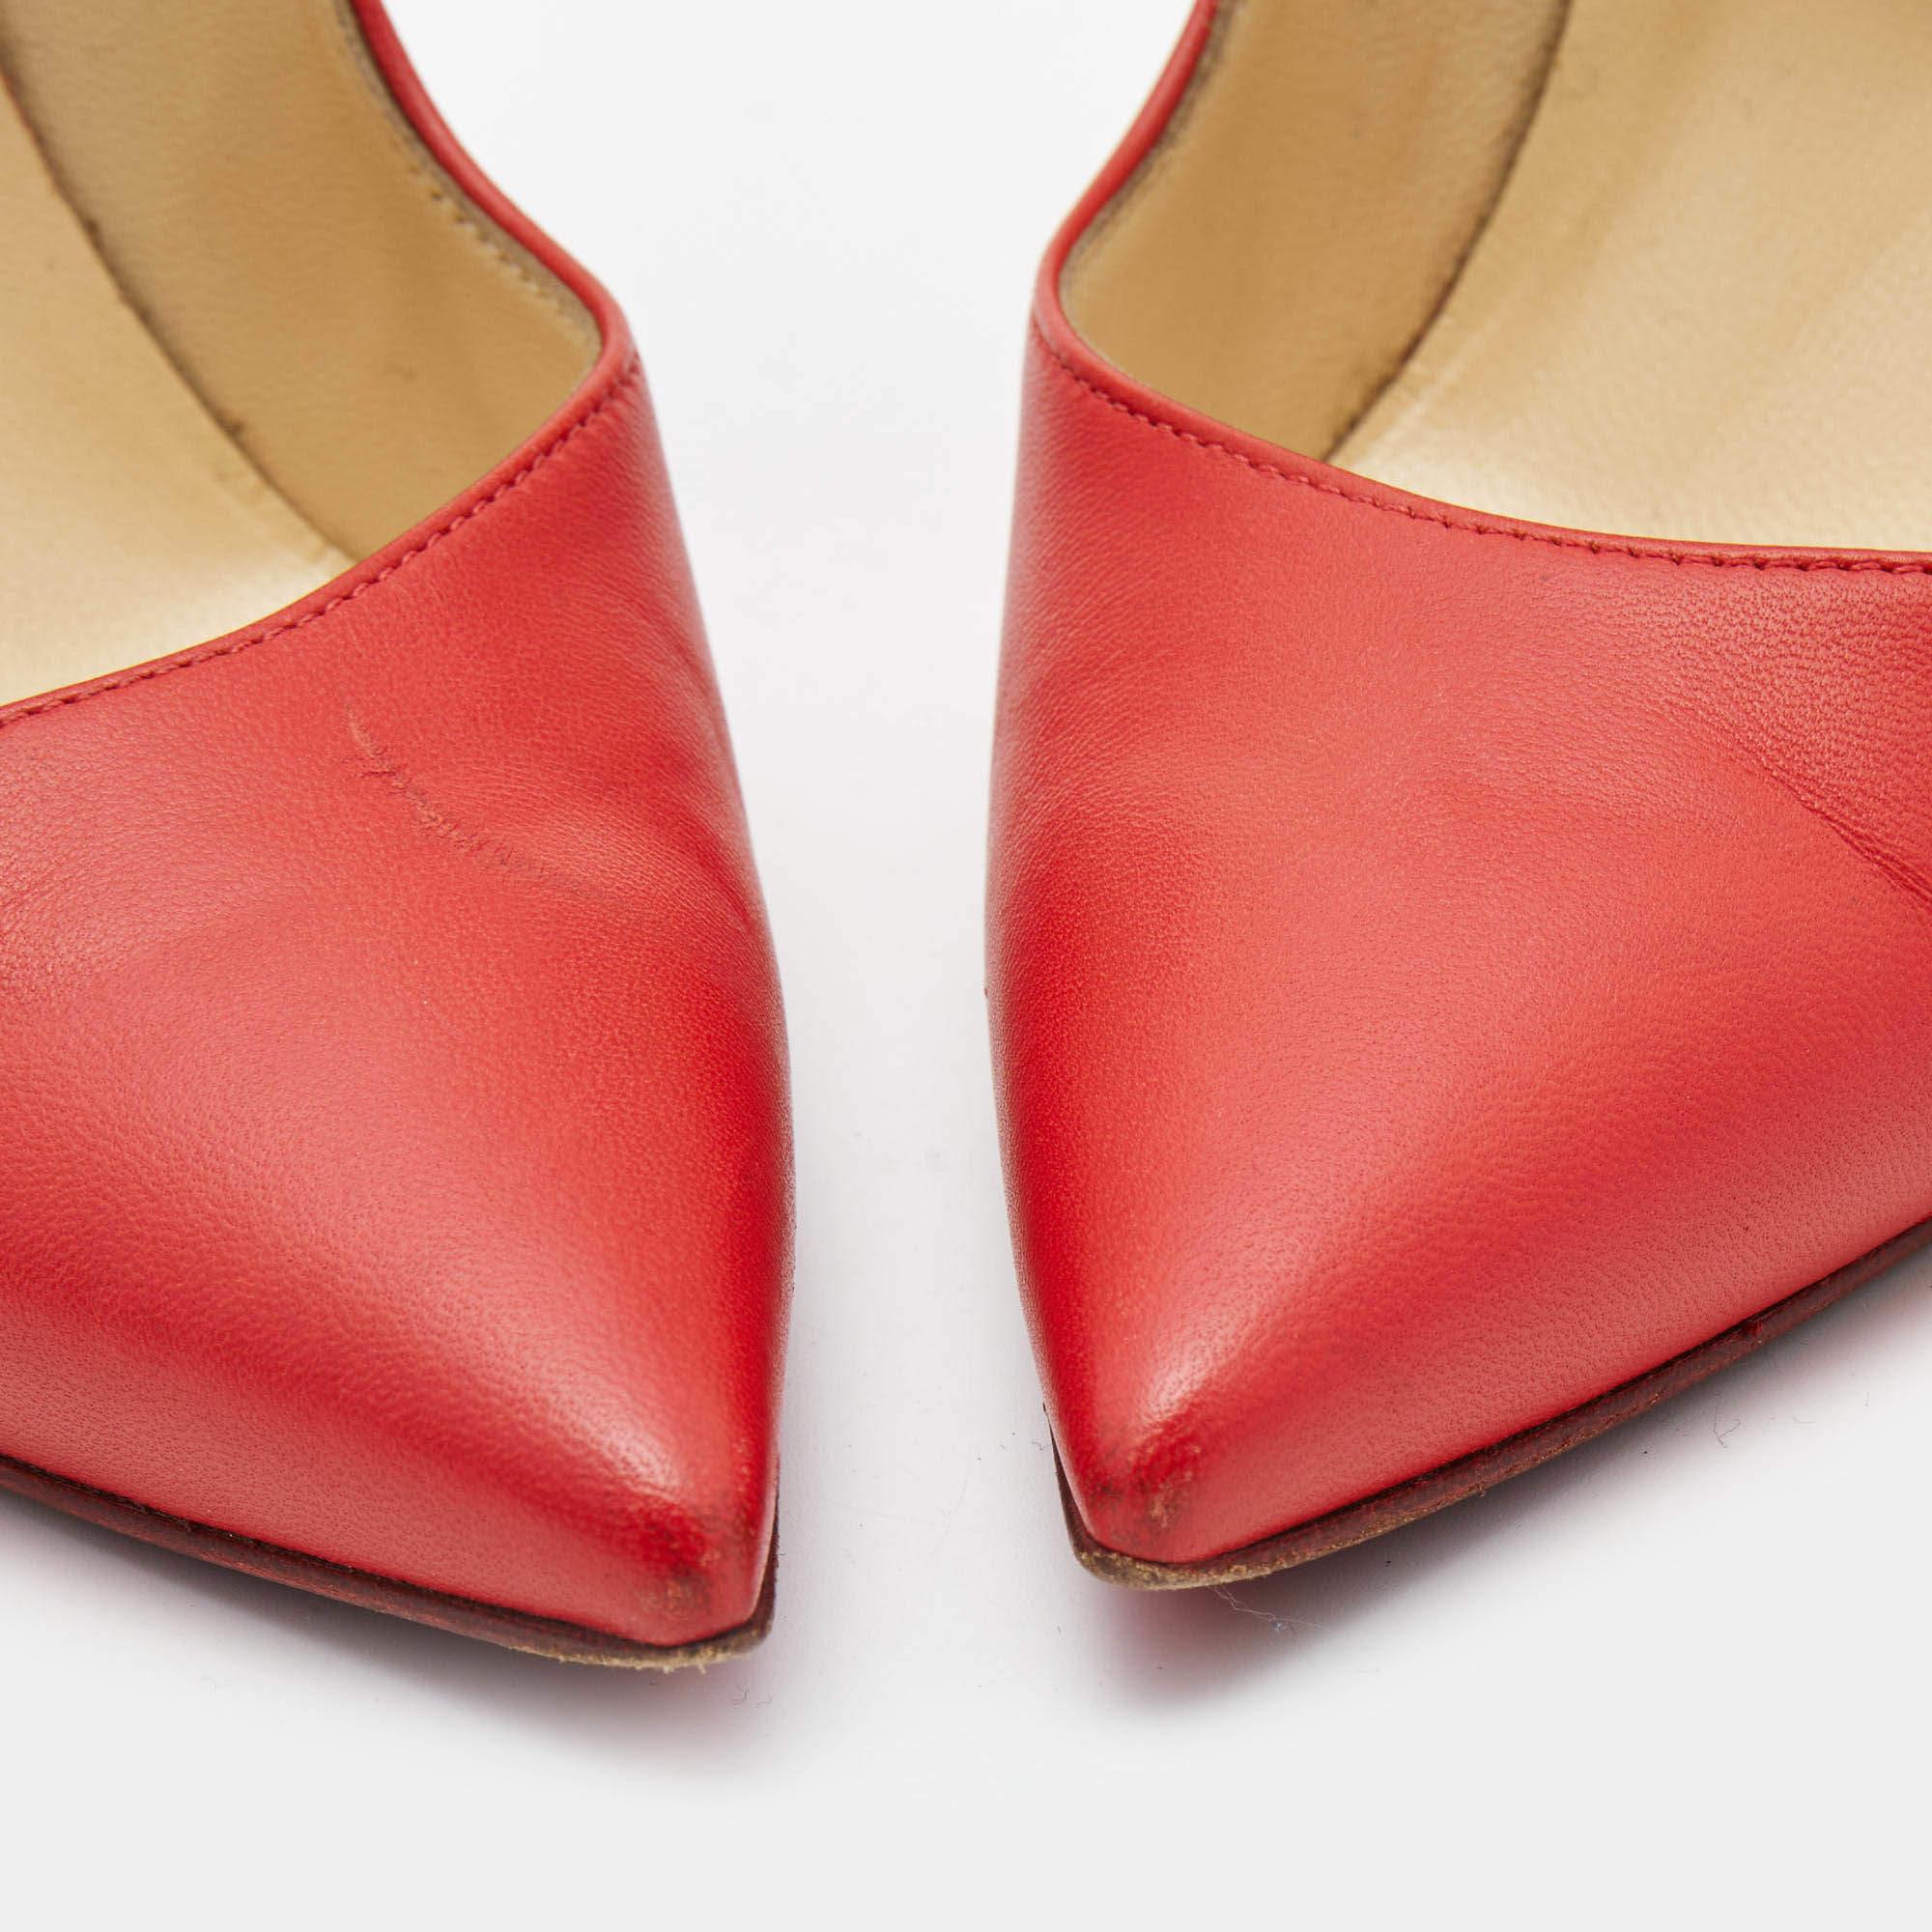 Christian Louboutin Red Leather So Kate Pointed Toe Pumps Size 37 For Sale 4